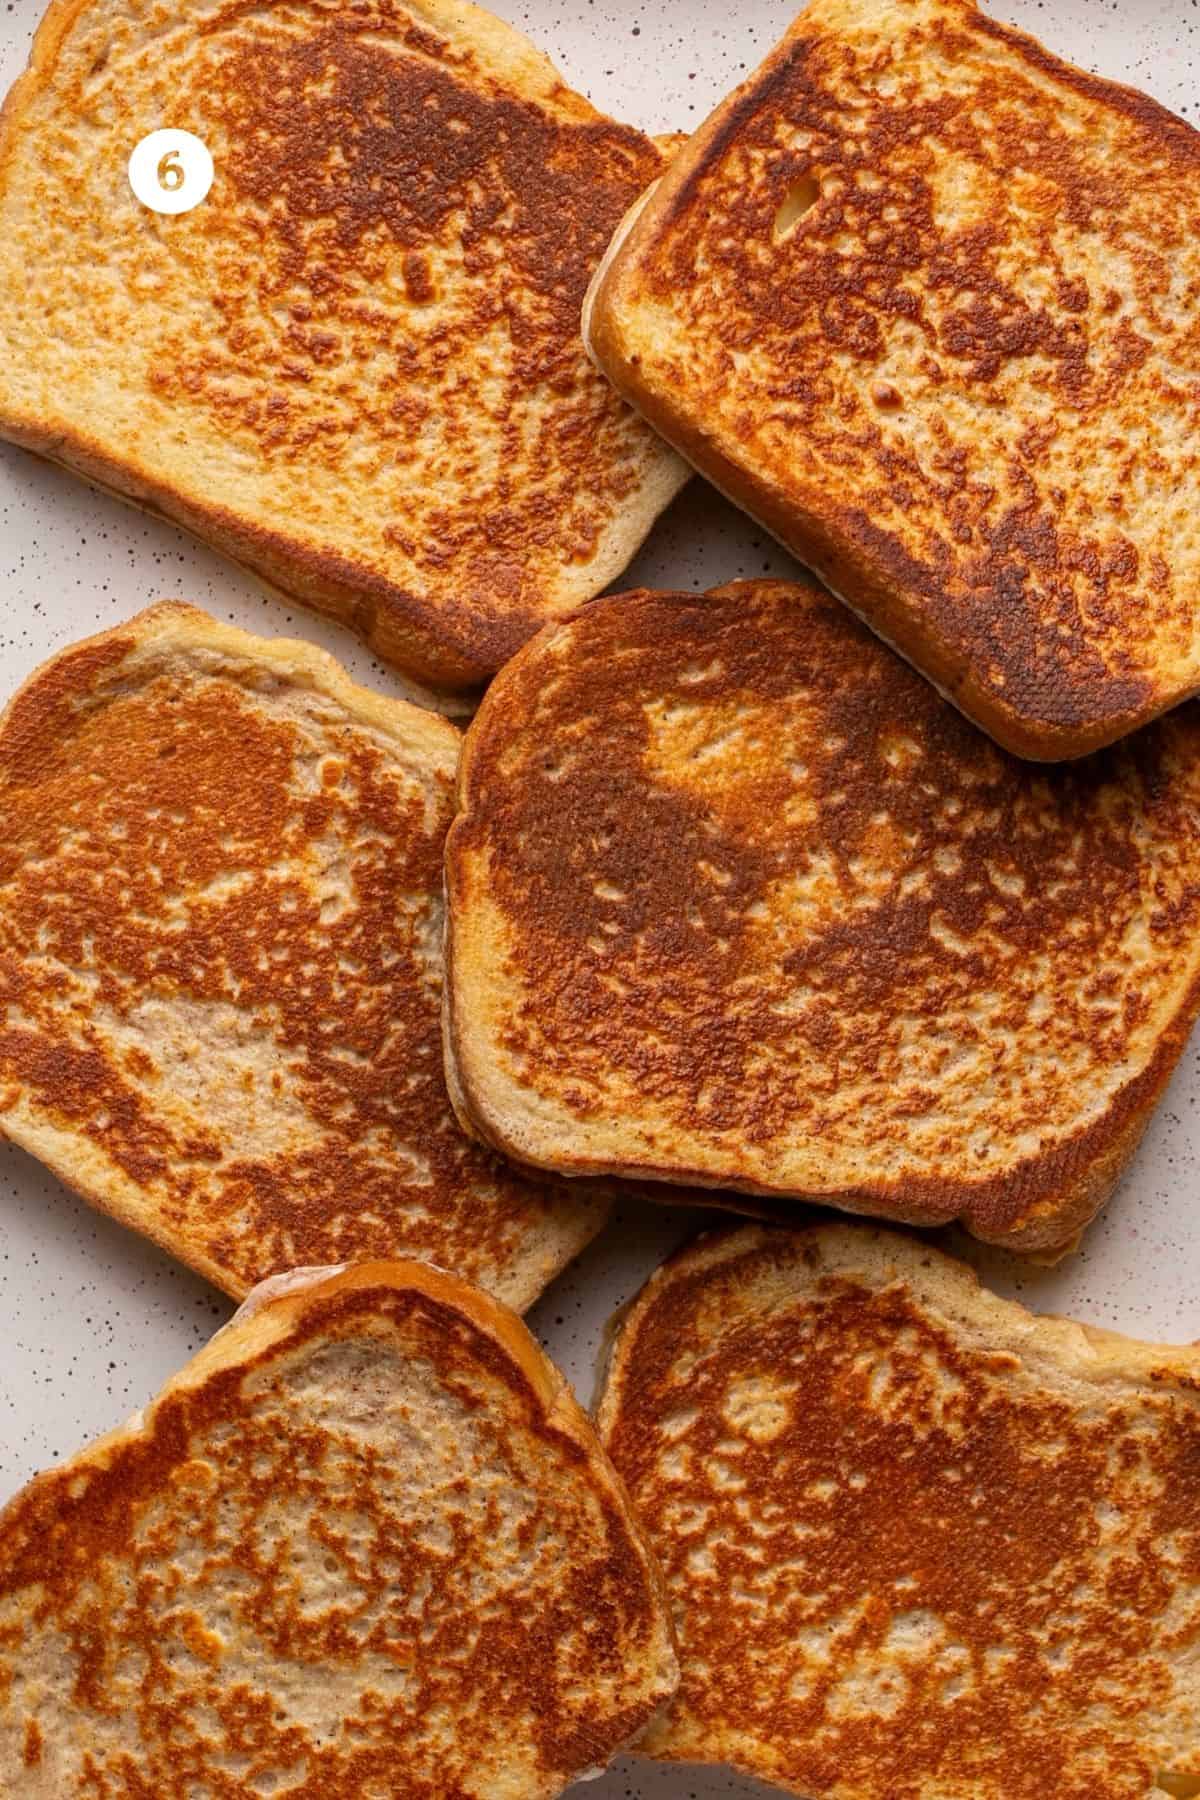 All six pieces of french toasted browned on both sides. 